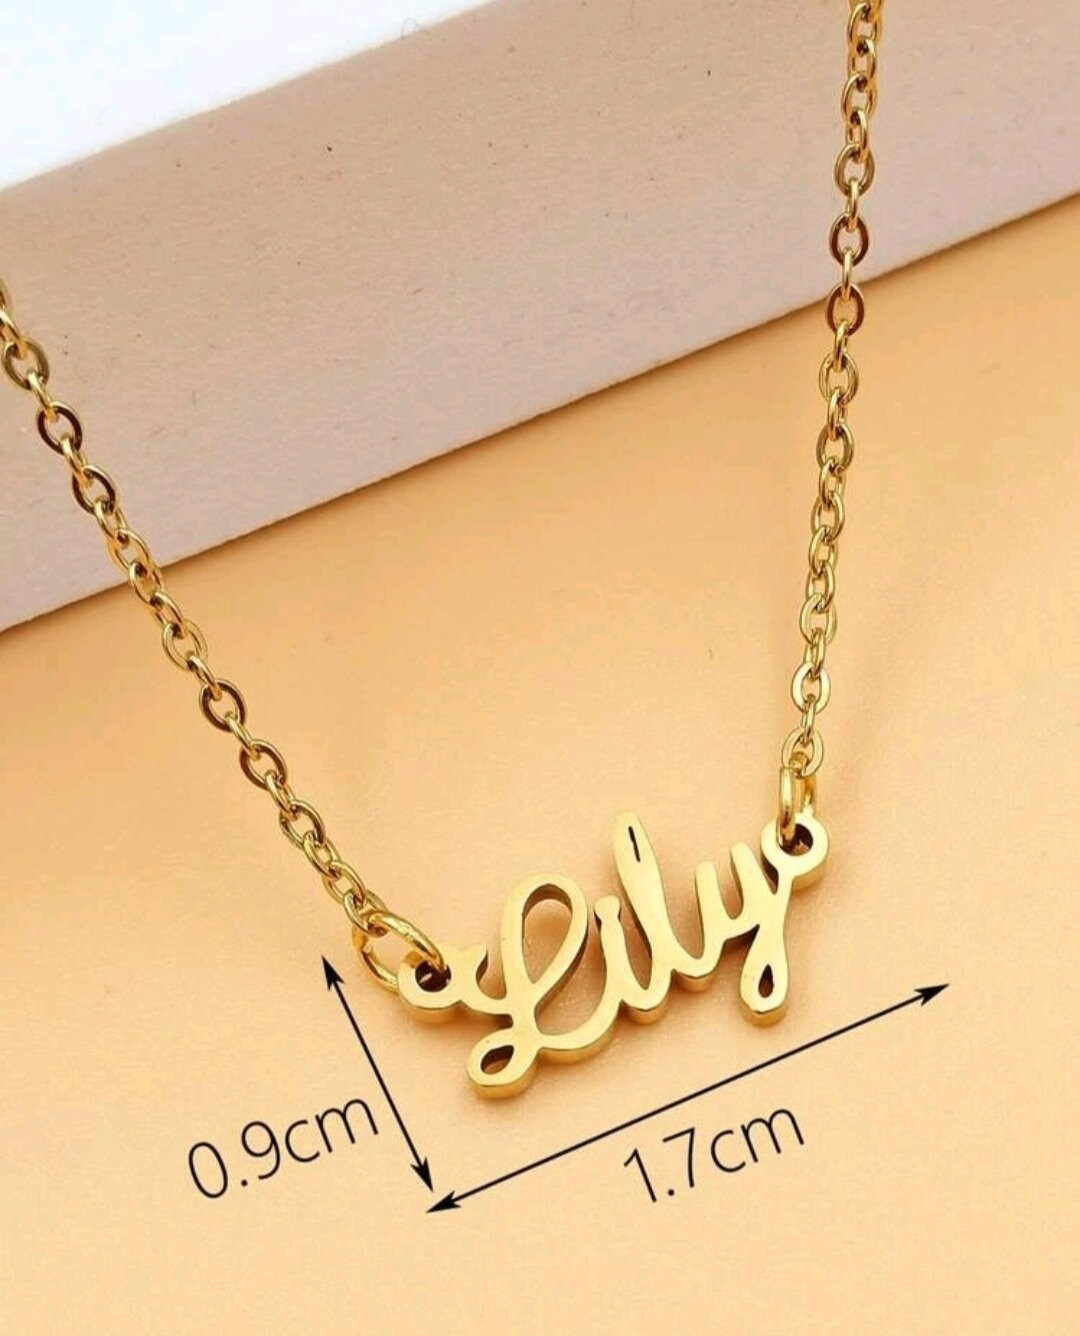 Dainty Name necklace Lily gold Stainless steel pendant necklace gift for her